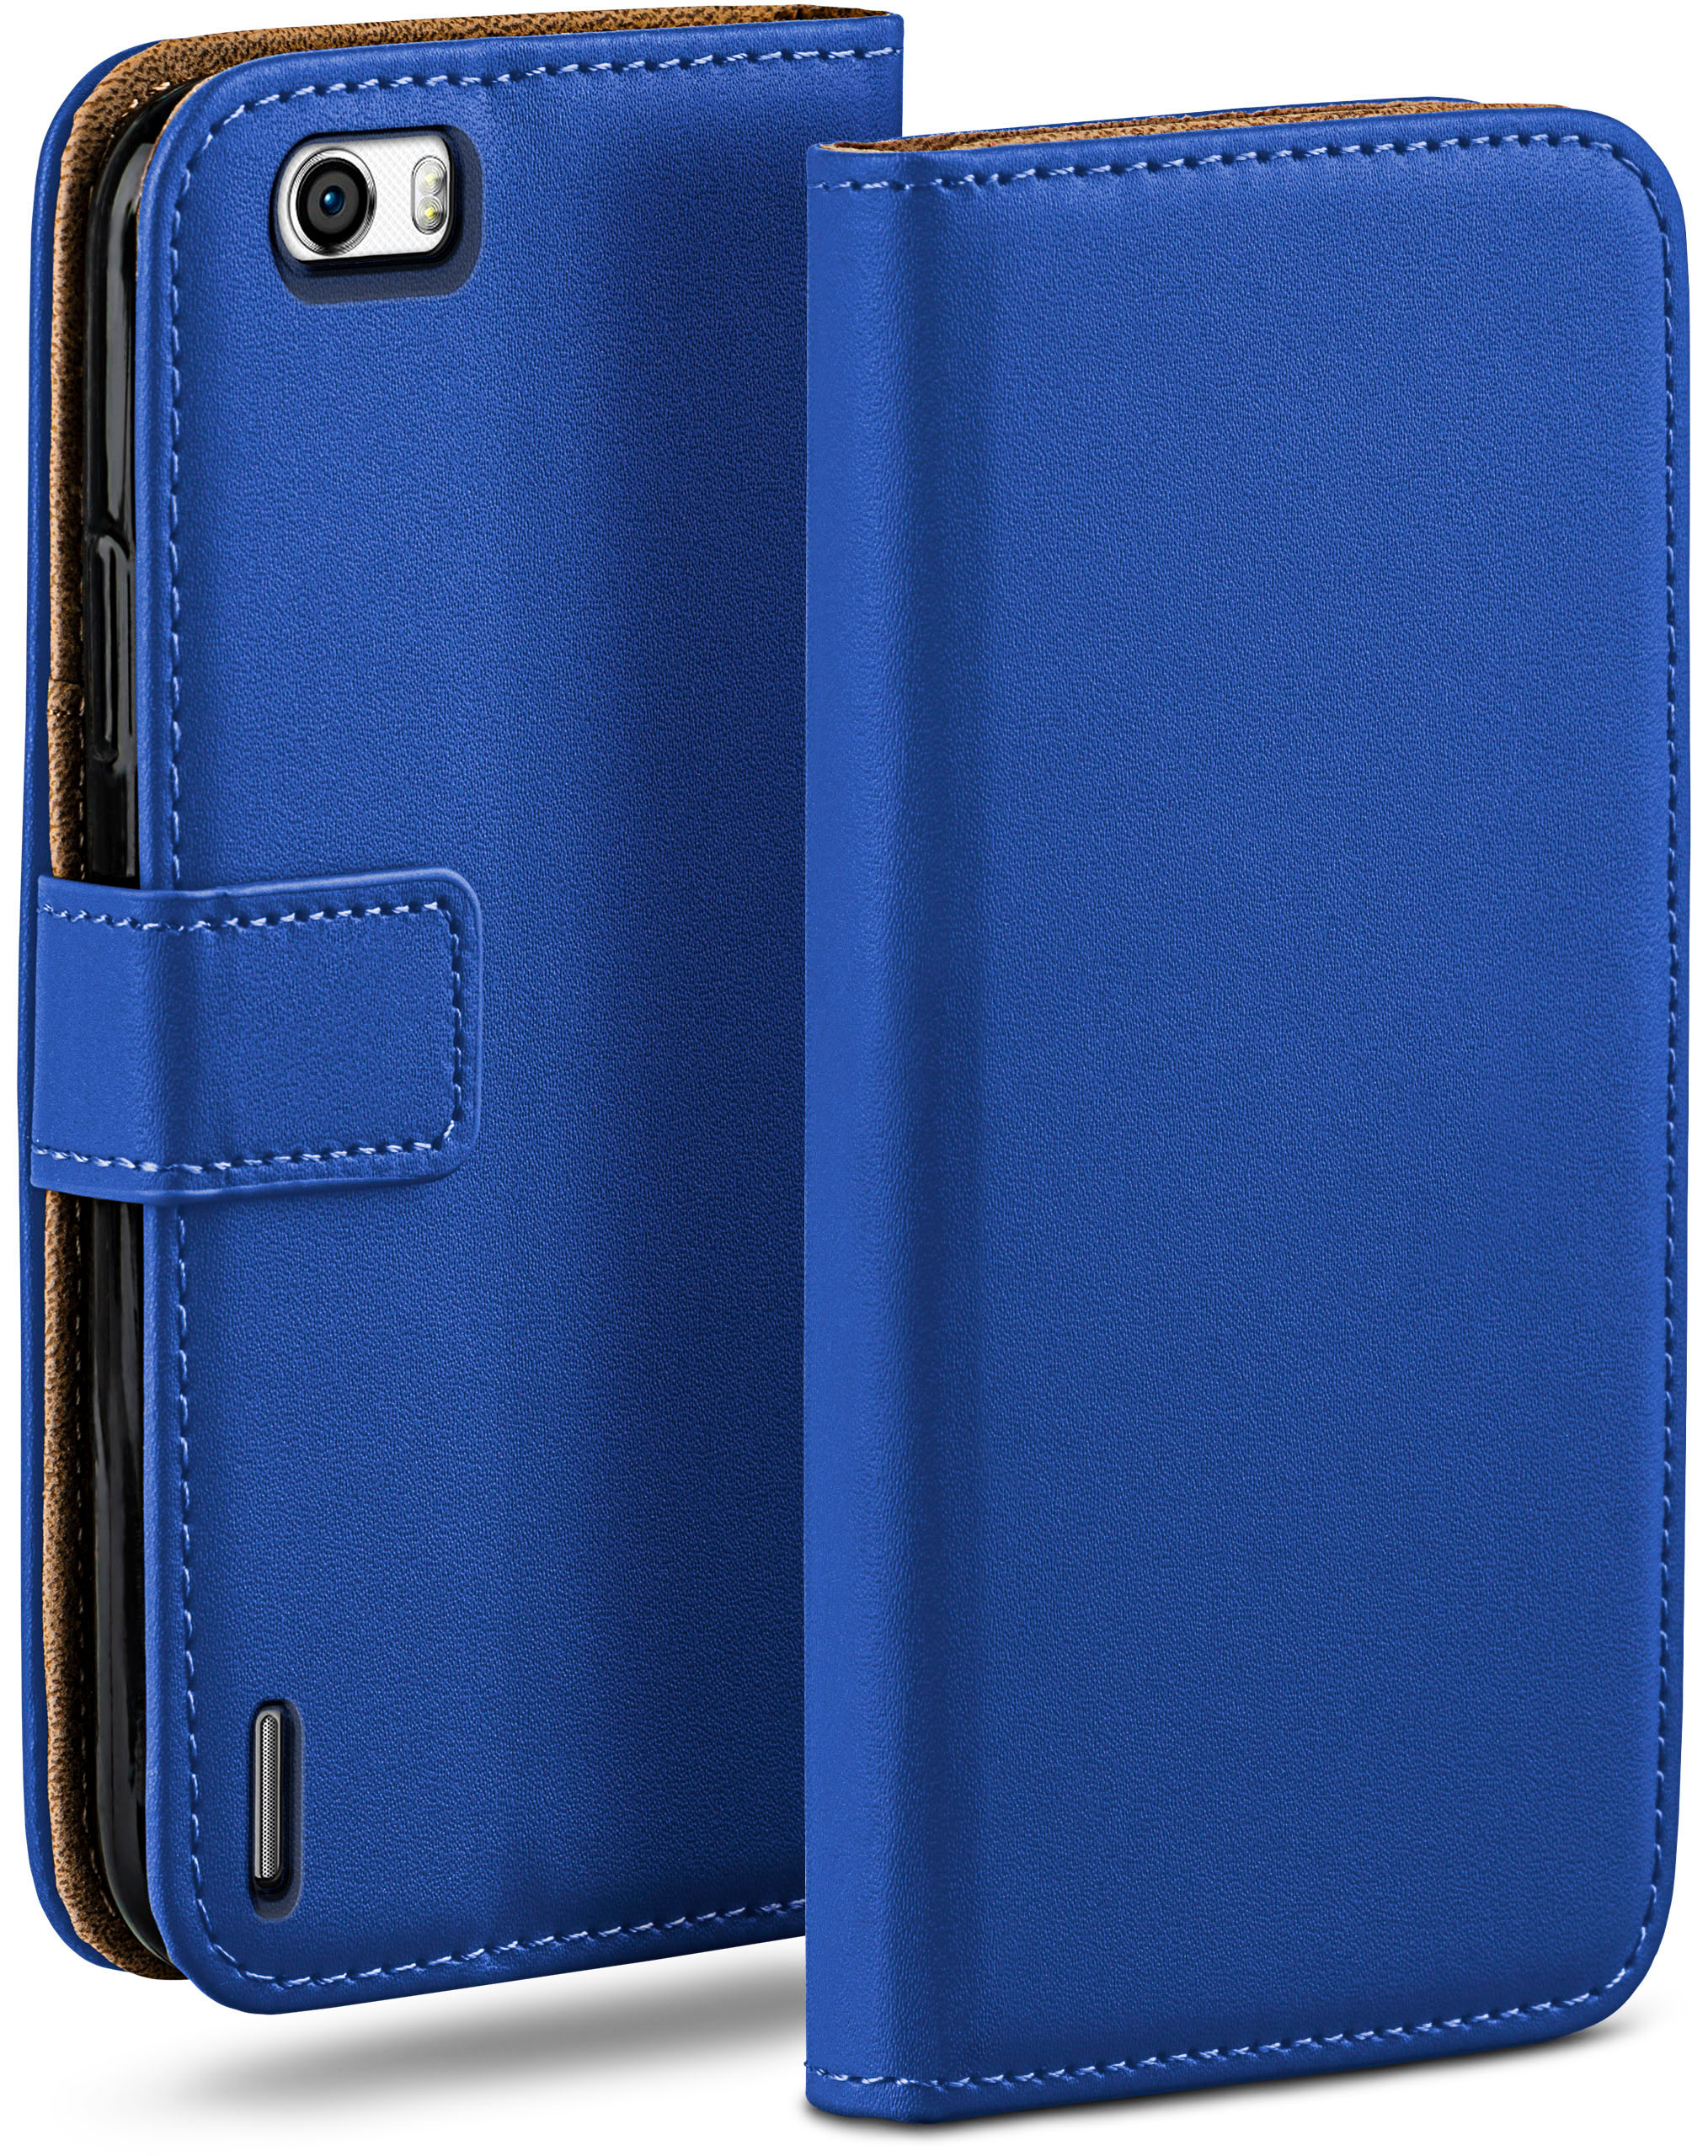 Case, Book 6, MOEX Honor Huawei, Royal-Blue Bookcover,